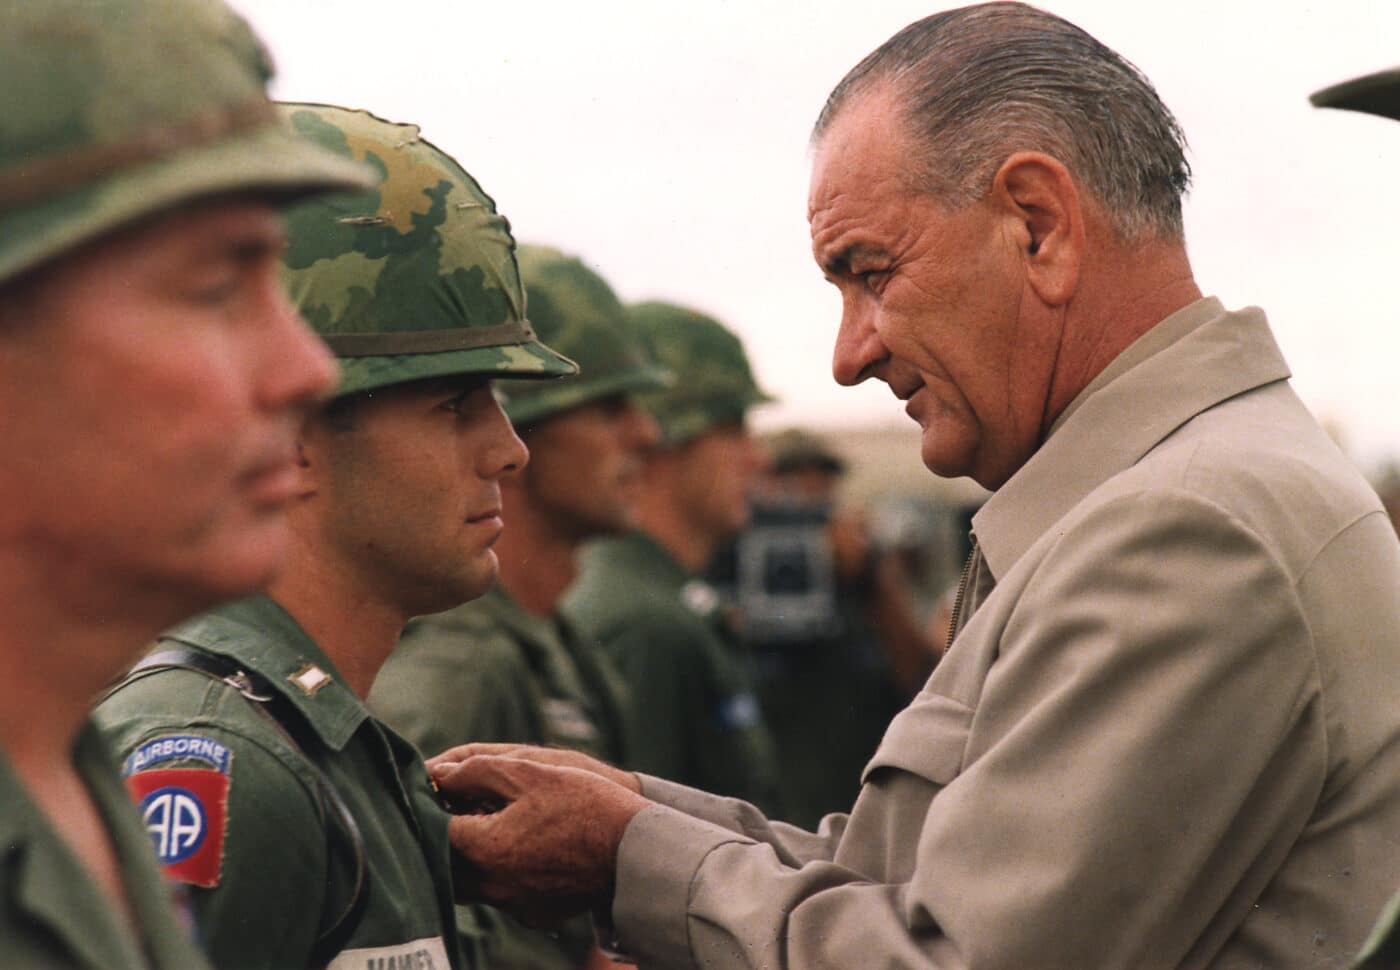 president lyndon johnson decorates a us soldier wearing an m1 helmet with mitchell camo